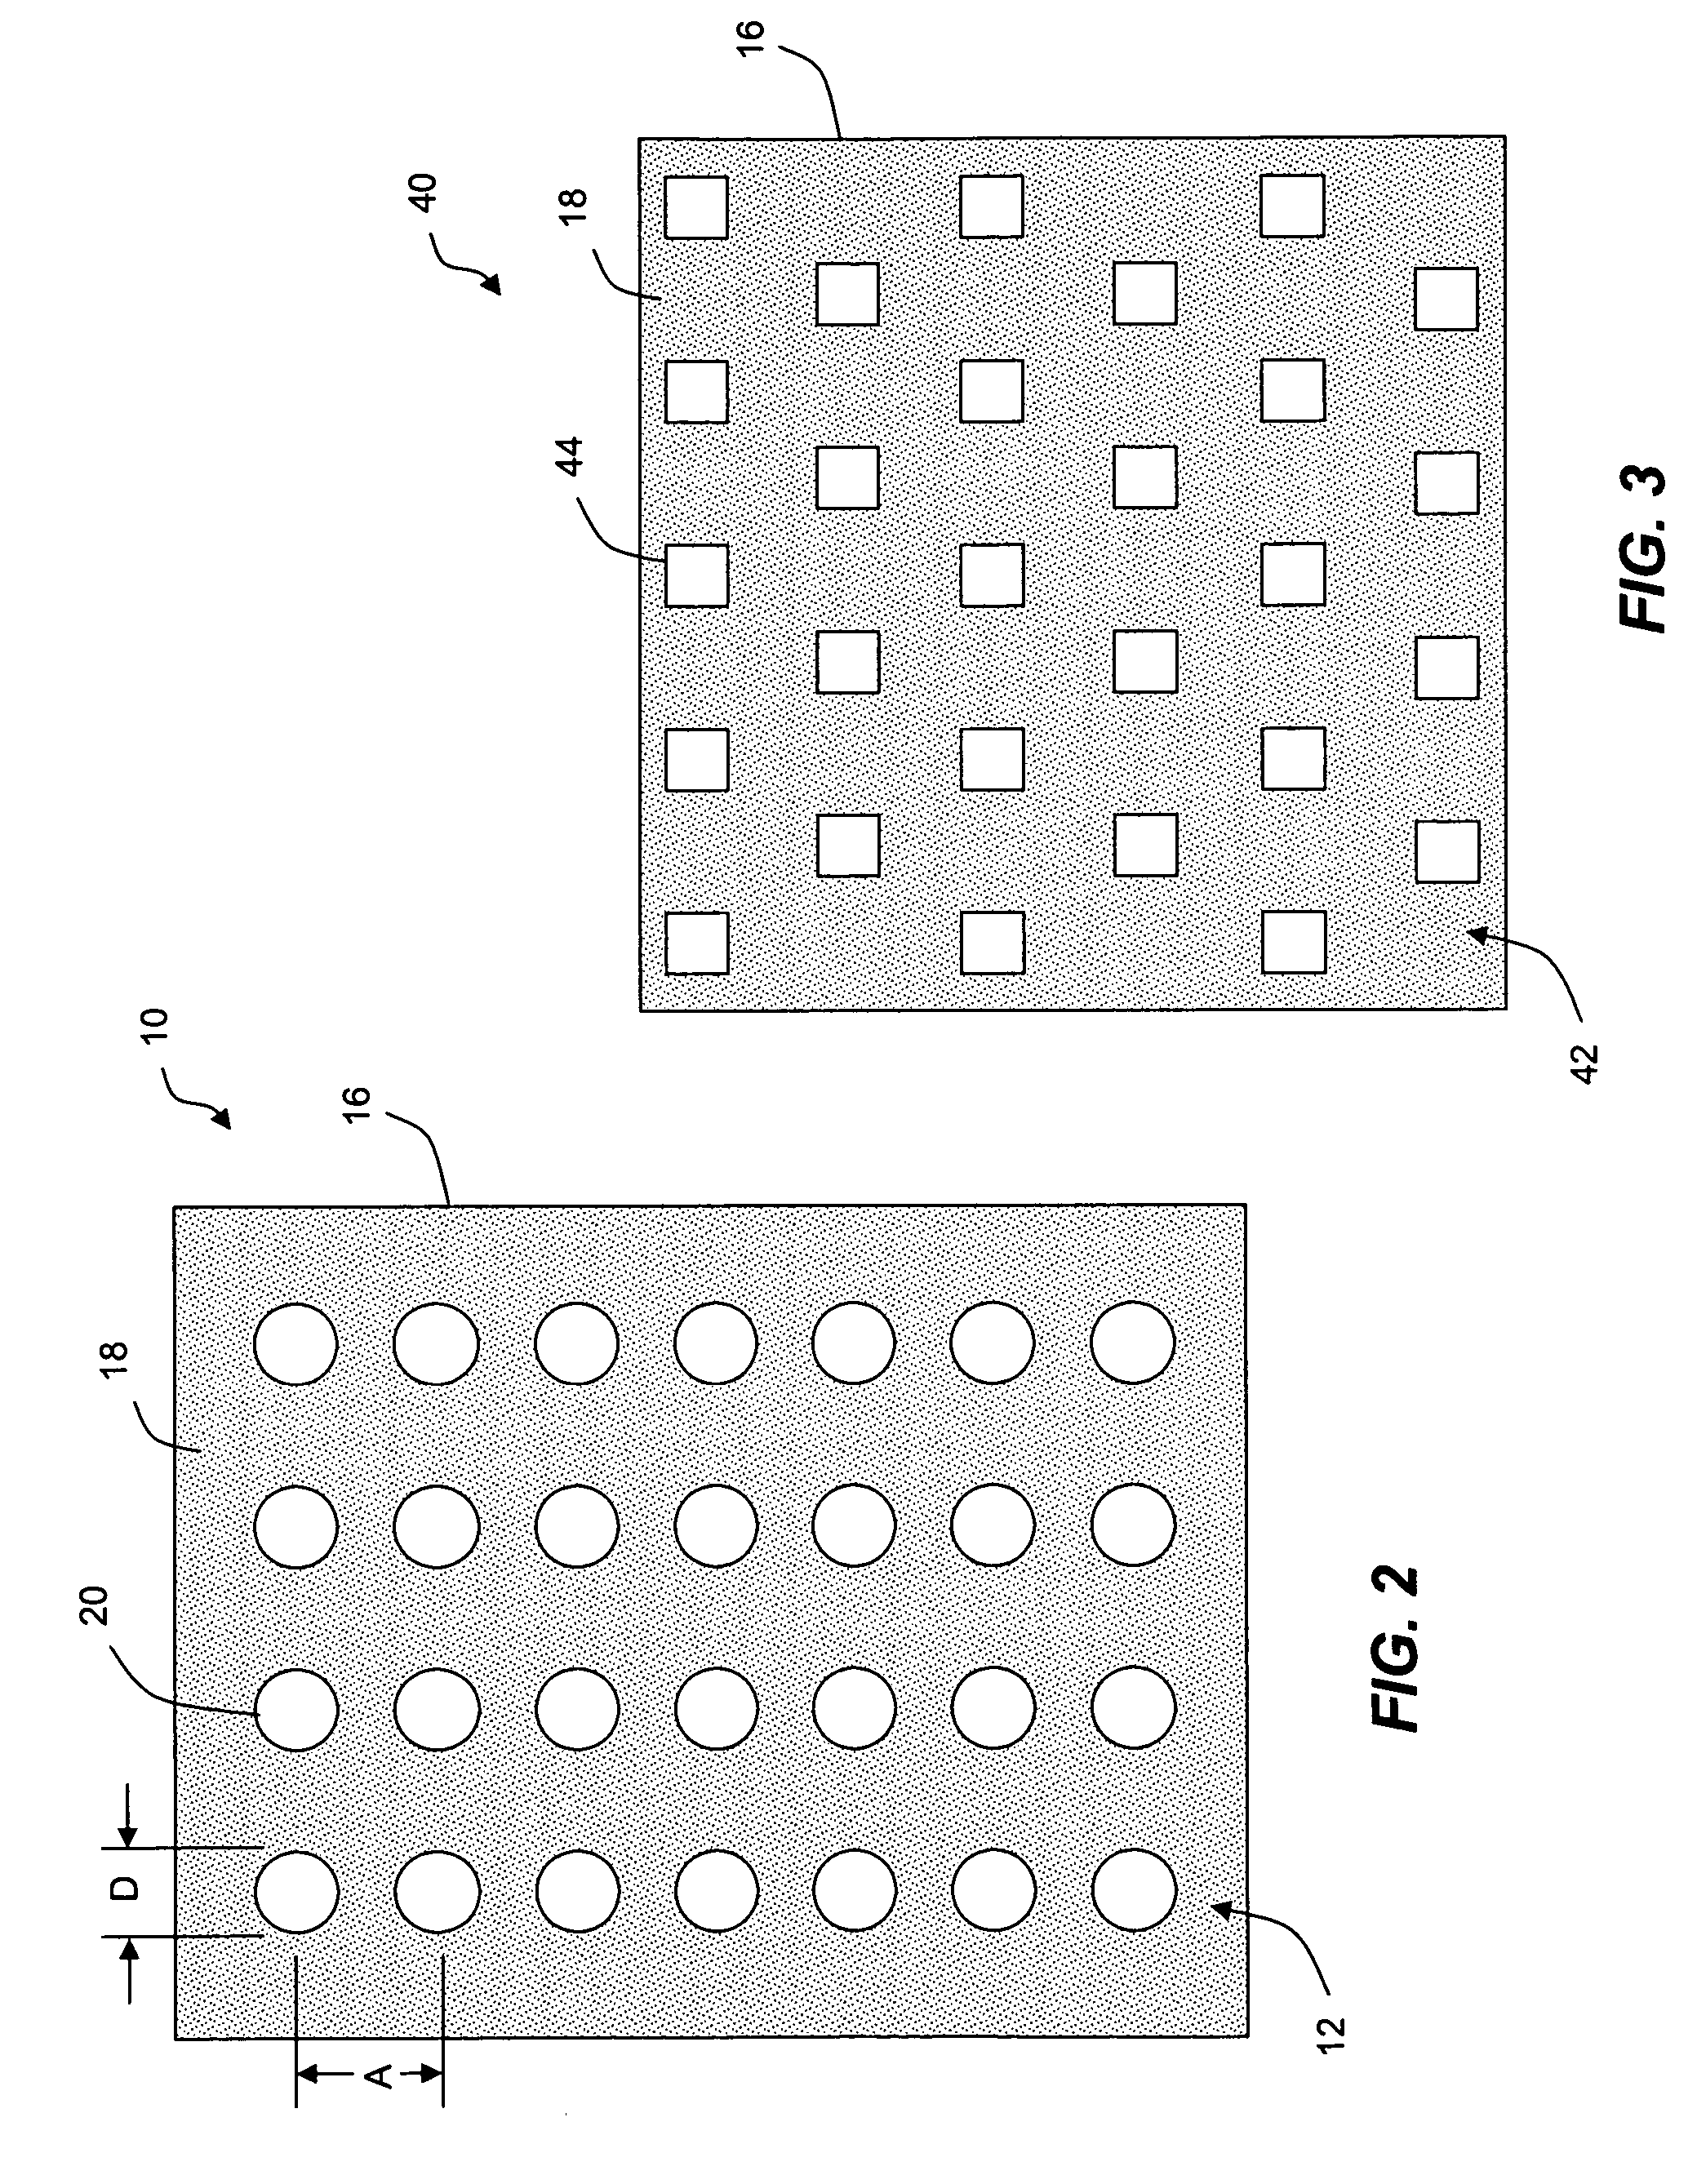 Thin film emitter-absorber apparatus and methods